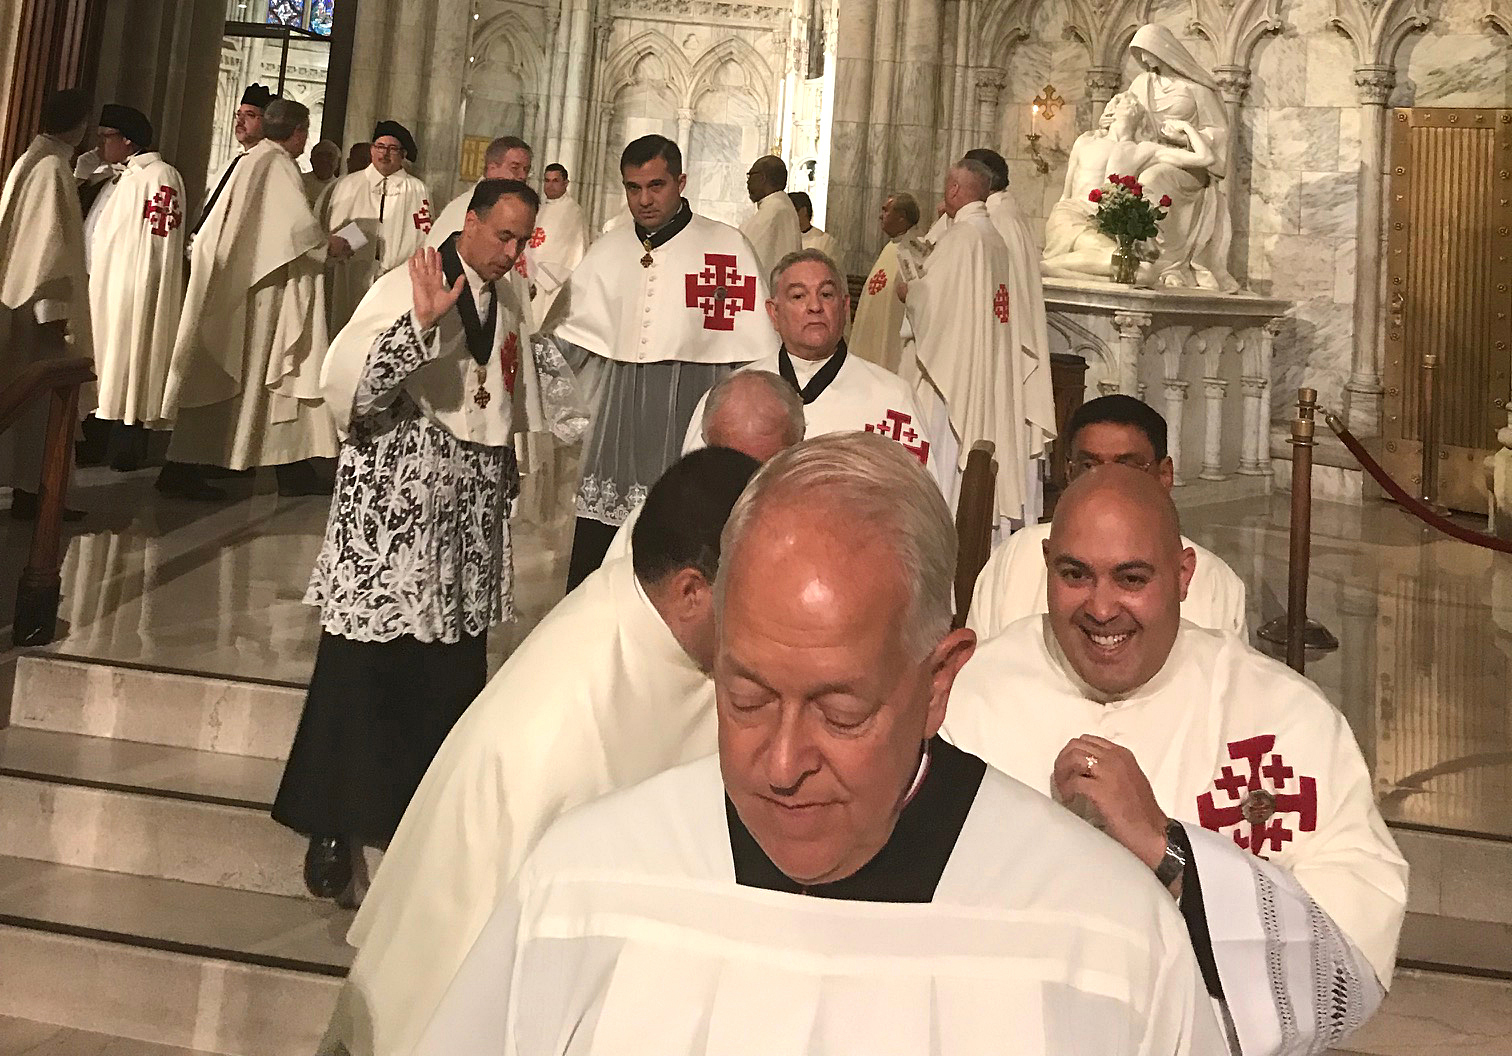 Two men from the Diocese of Buffalo participated in the Investiture and Promotion Mass of Equestrian Order of the Holy Sepulchre of Jerusalem. At St. Patrick Cathedral in New York City, Father Cole Webster was inducted into the order as a knight chaplain and Terrence McCann was promoted to the rank of knight commander.

Courtesy of Father Cole Webster.